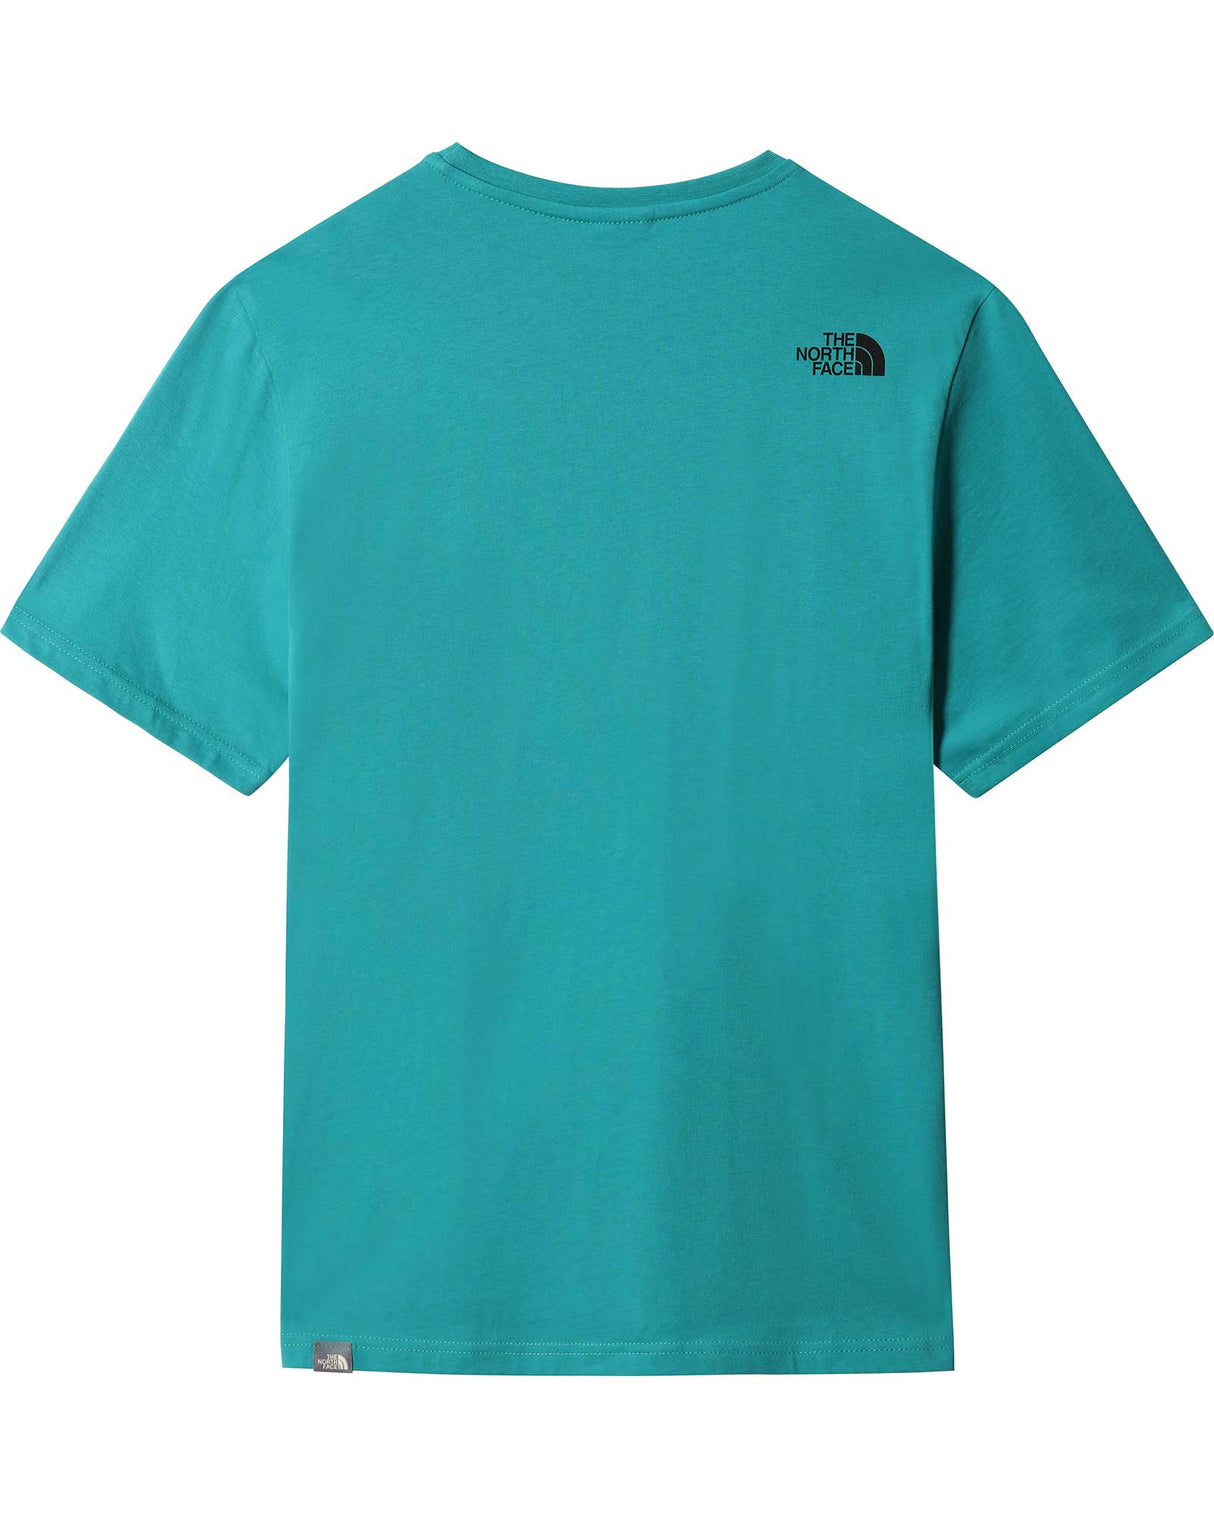 The North Face Short Sleeve Simple Dome T-Shirt in Porcelain Green